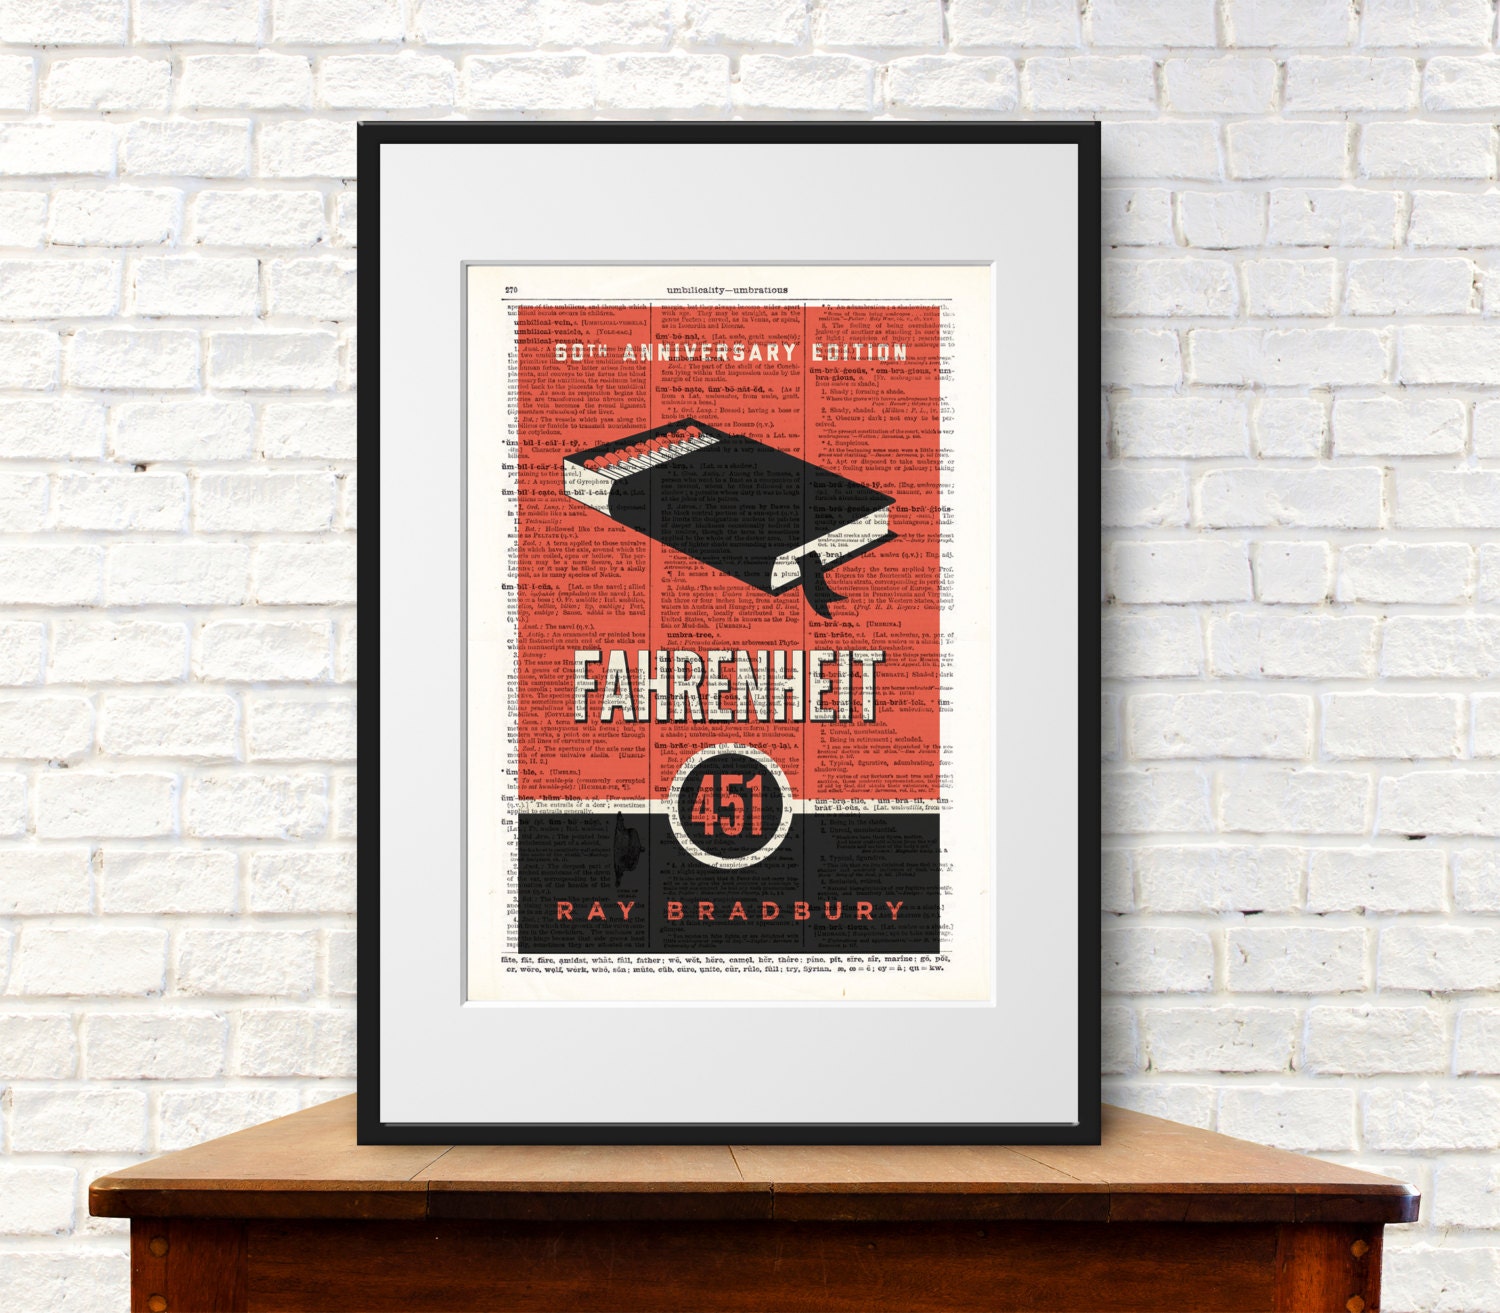 Fahrenheit 451 by Ray Bradbury, First Edition Cover, Dictionary Print:  Classic Novel, Book, Fan, Poster, Art, Gift -  Norway